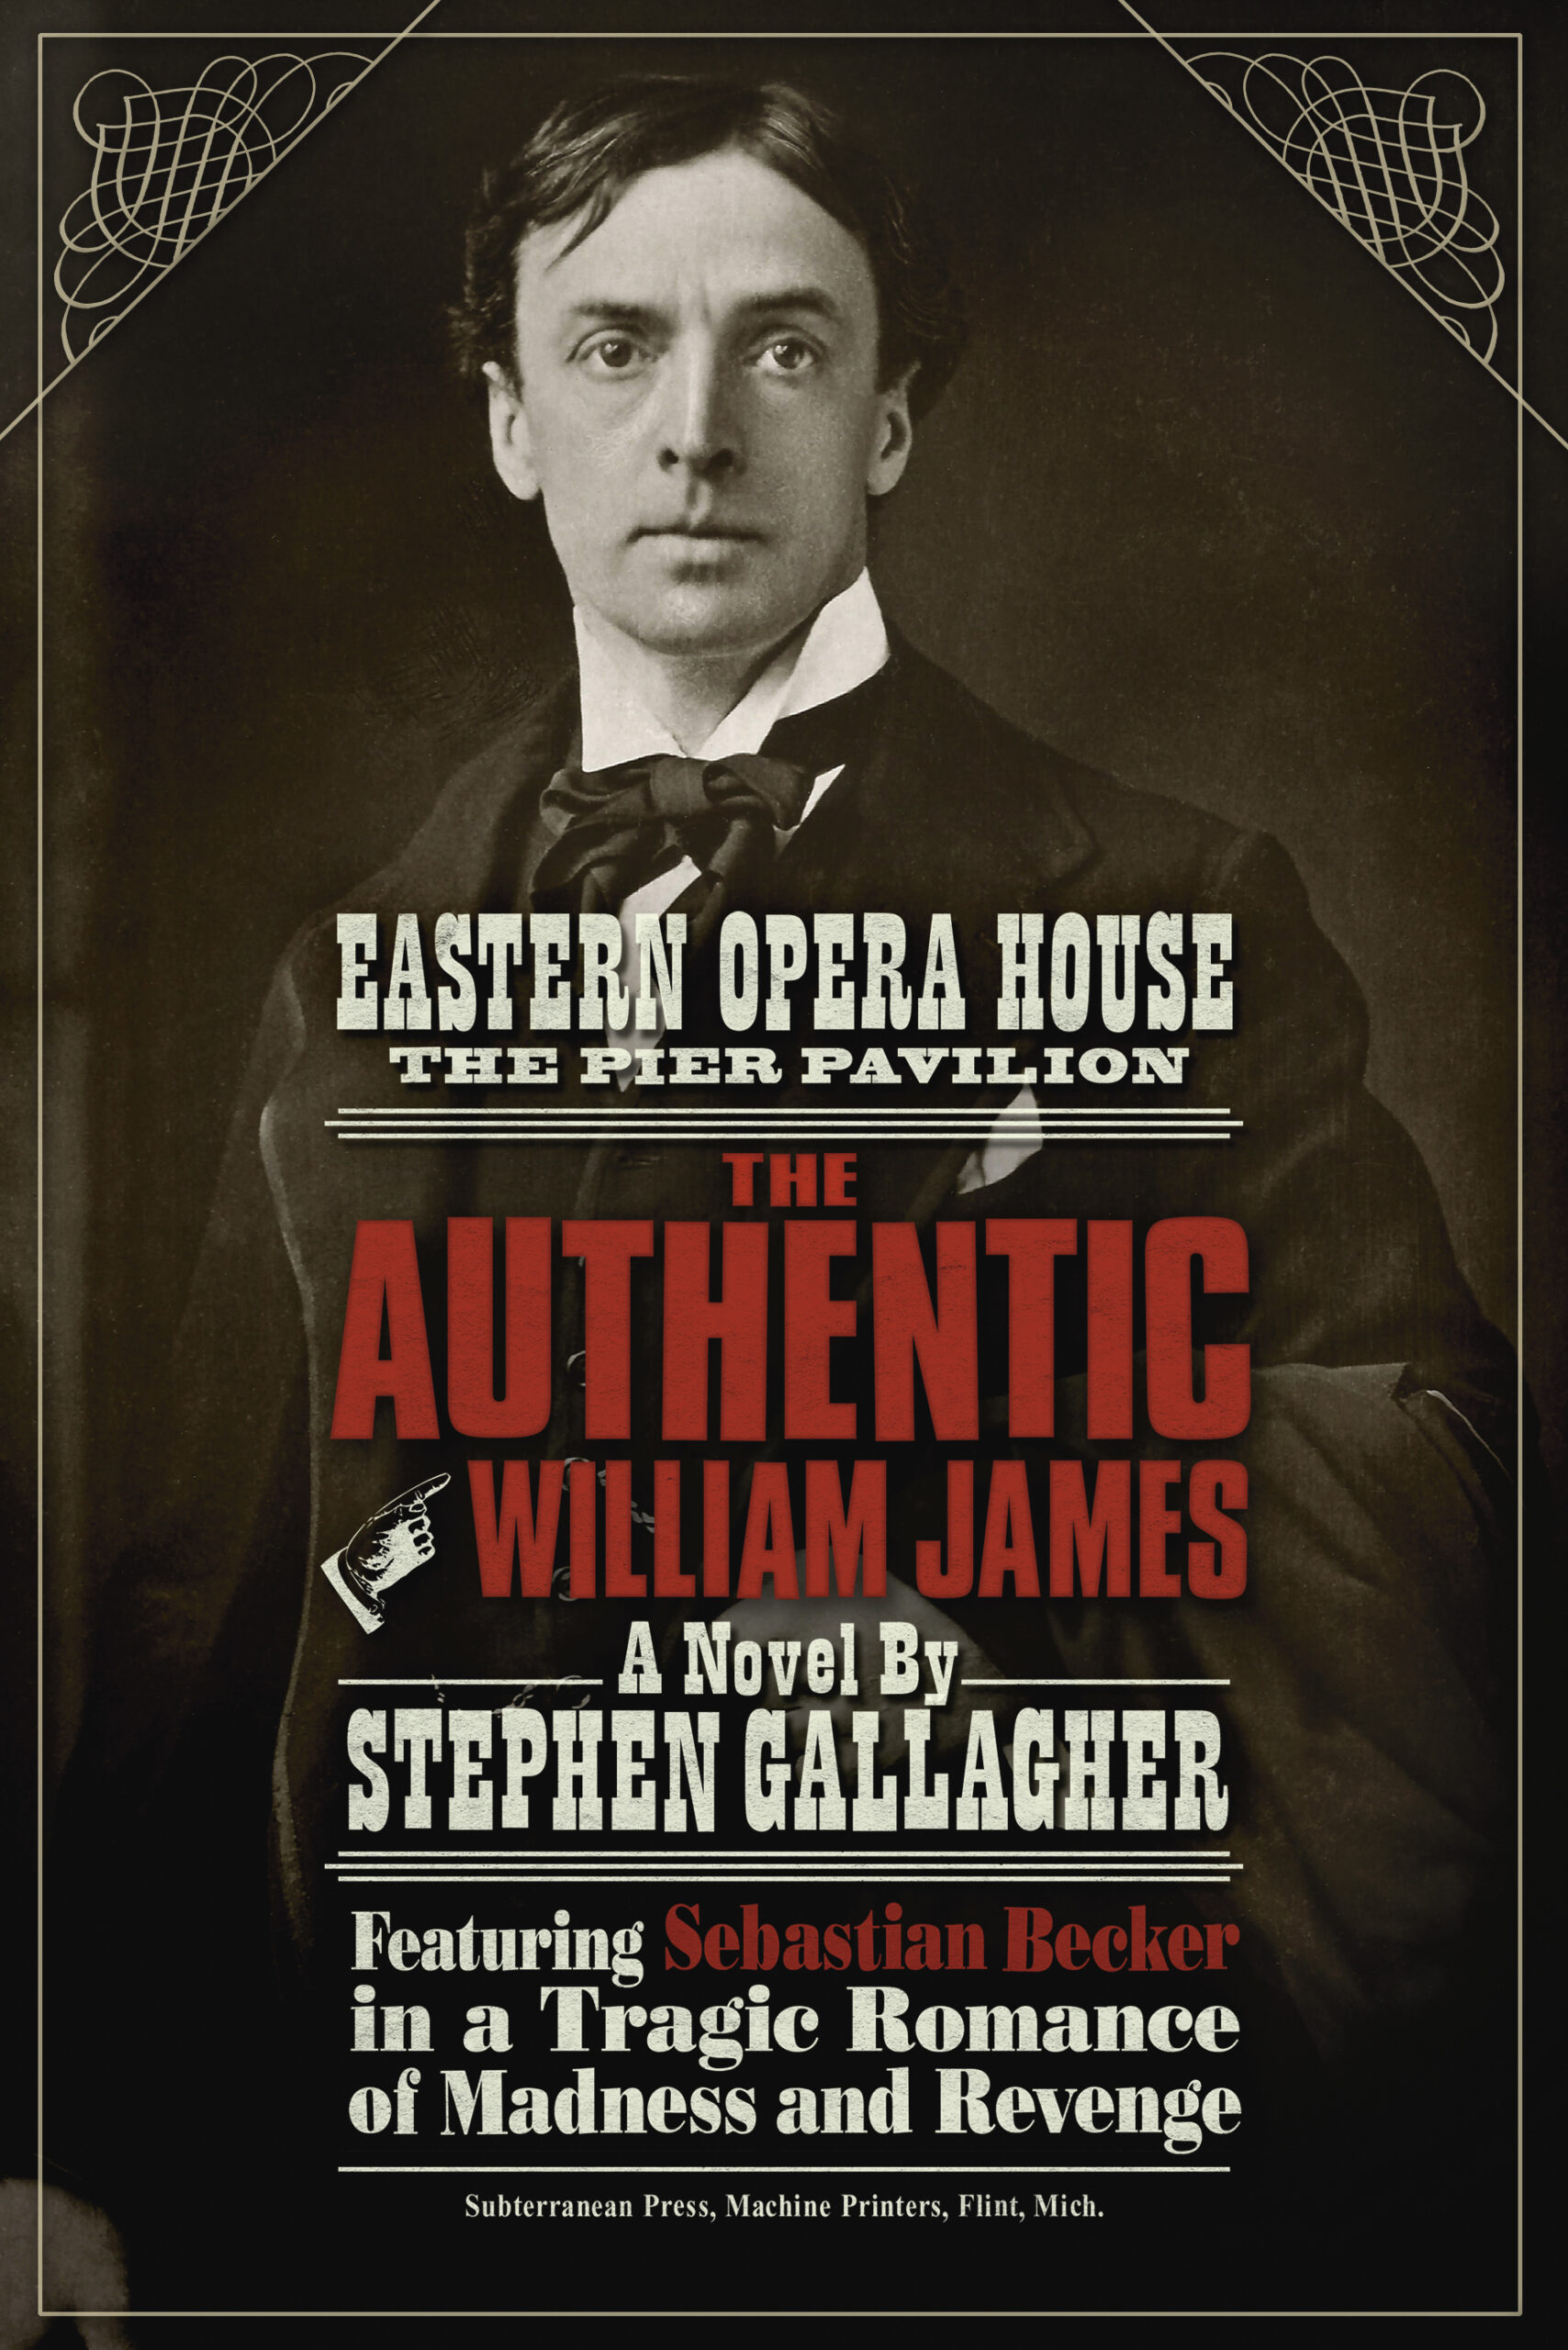 Subterranean Hardback cover for The Authentic William James. Playbill-style typography over a cabinet card photo of actor John Martin Harvey